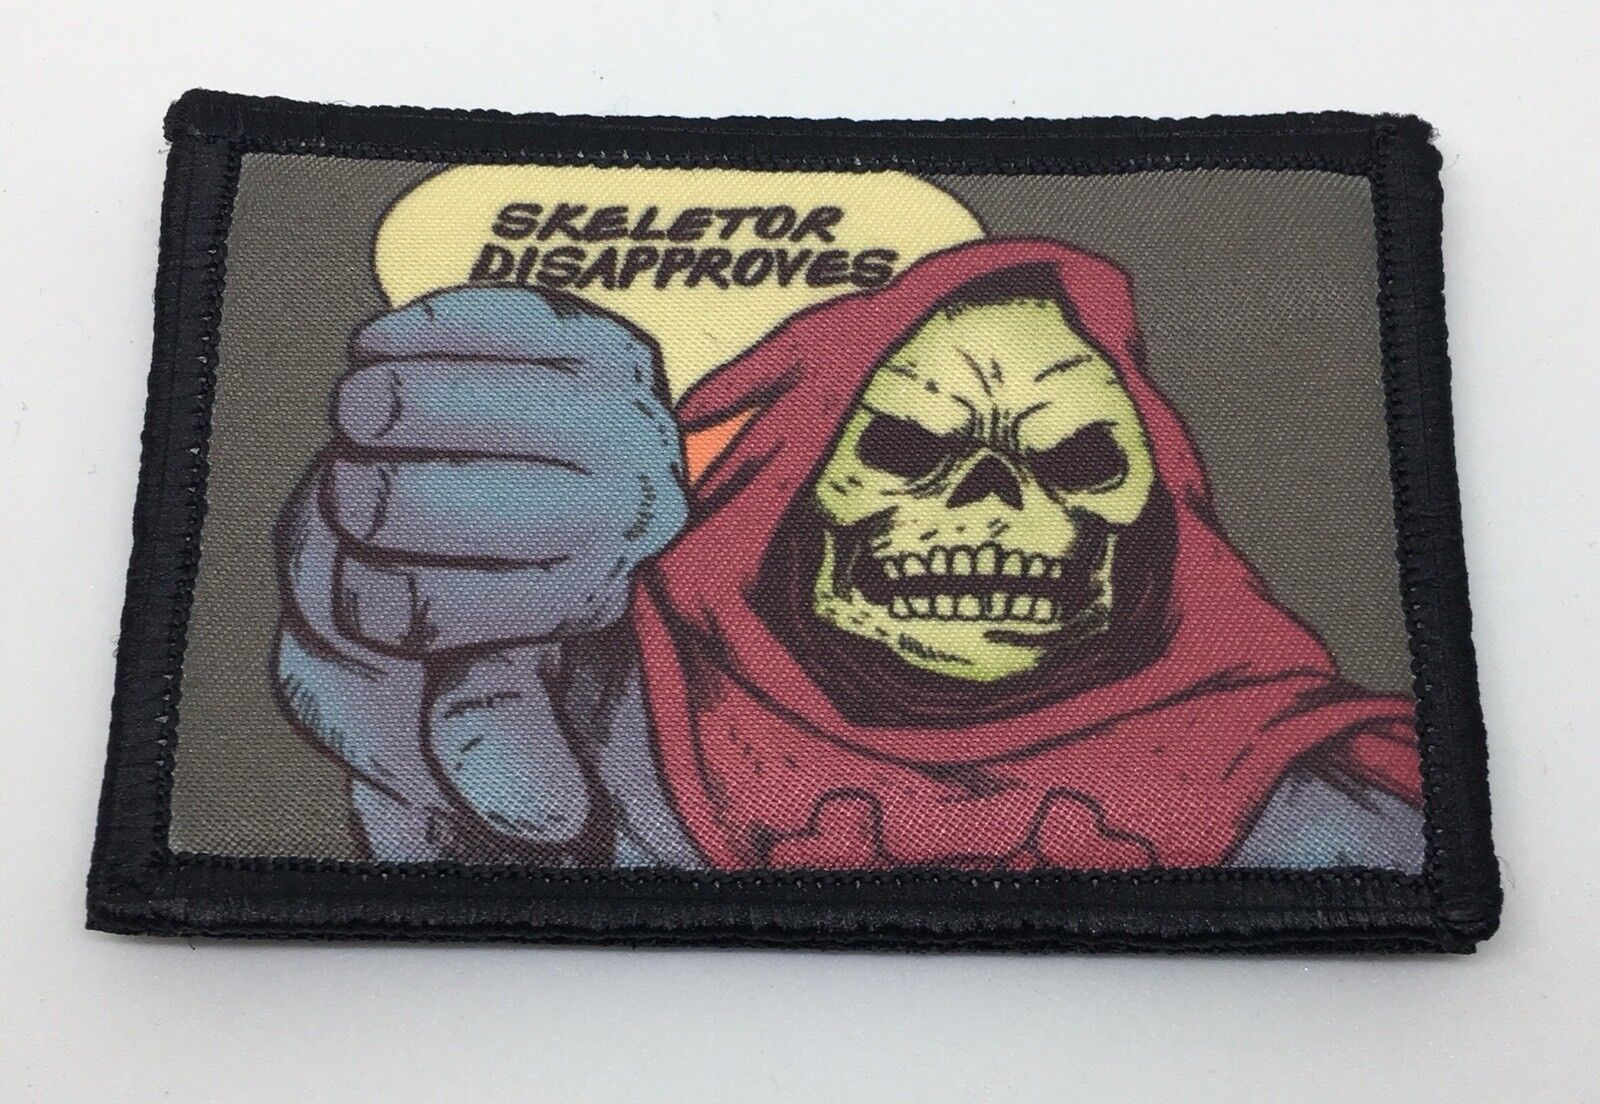 Skeletor Disapproves Morale Patch Army Military Tactical flag USA